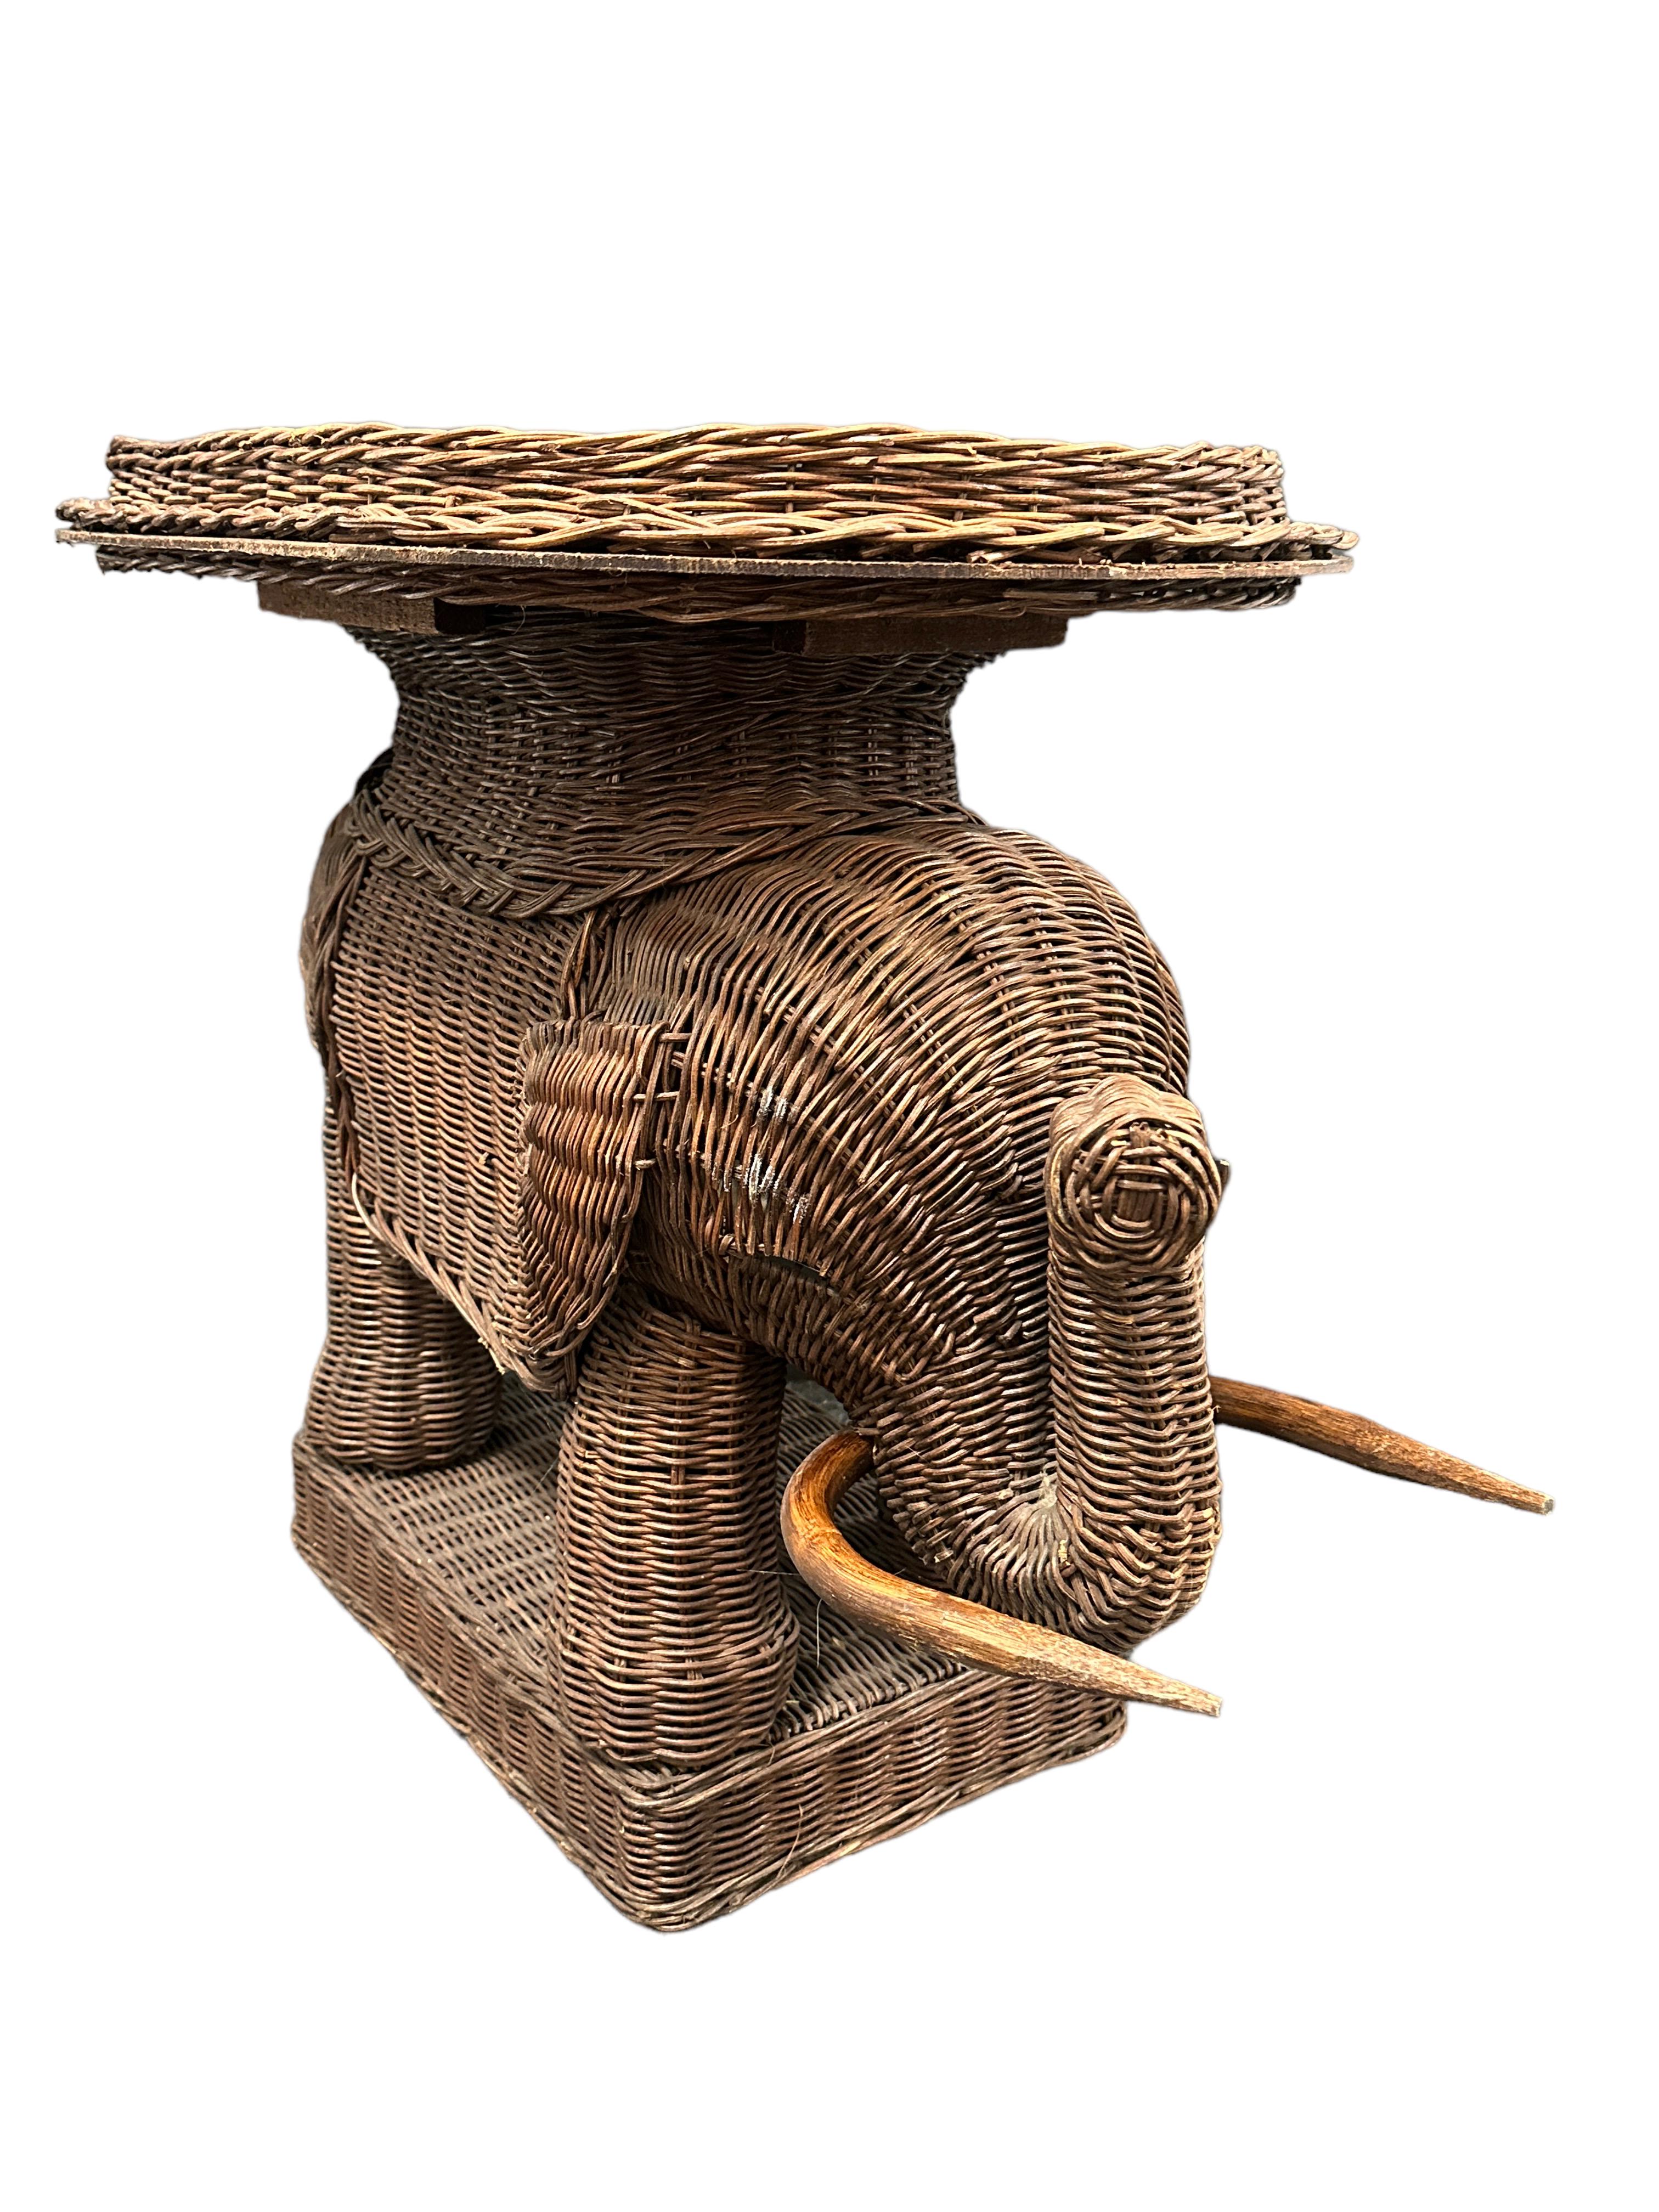 Hollywood Regency Stunning Rattan Wicker Elephant Side Table with Tray, France, 1960s For Sale